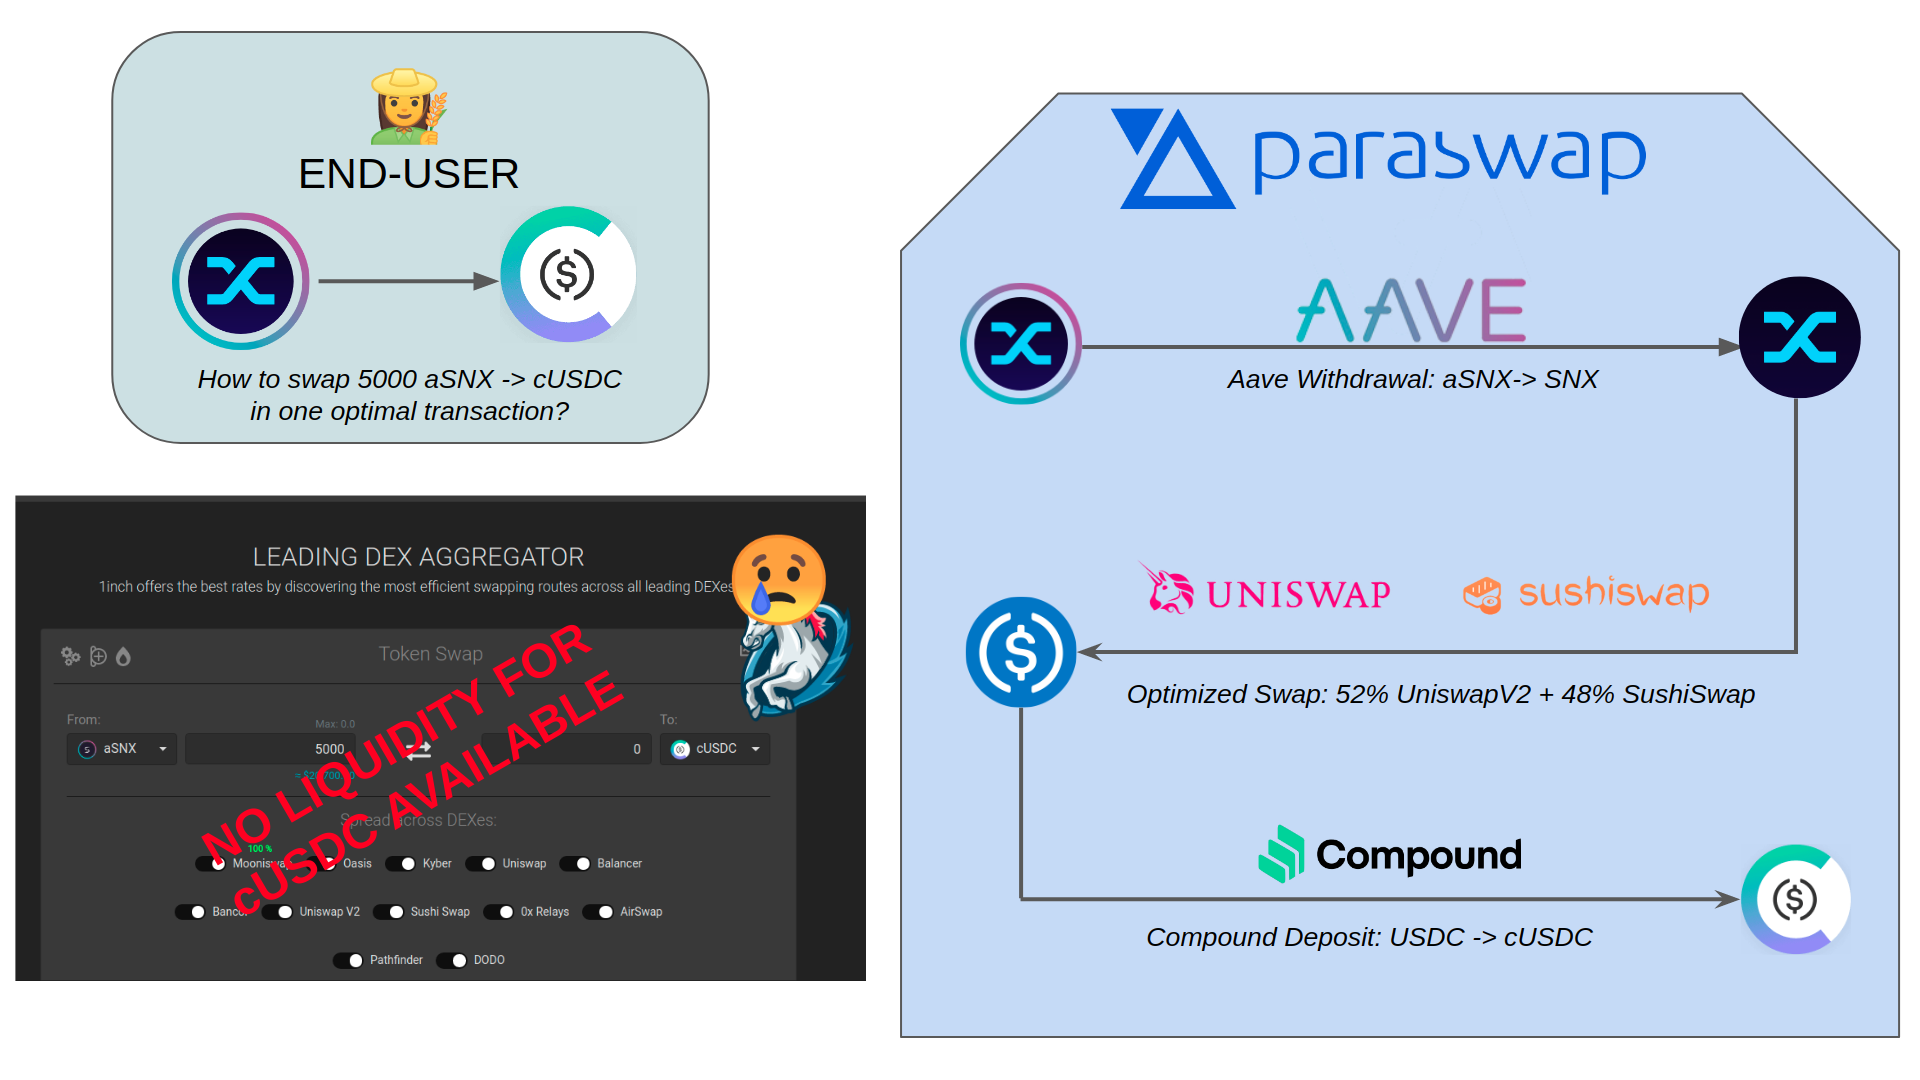 What makes ParaSwap better than other aggregators like 1InchExchange?